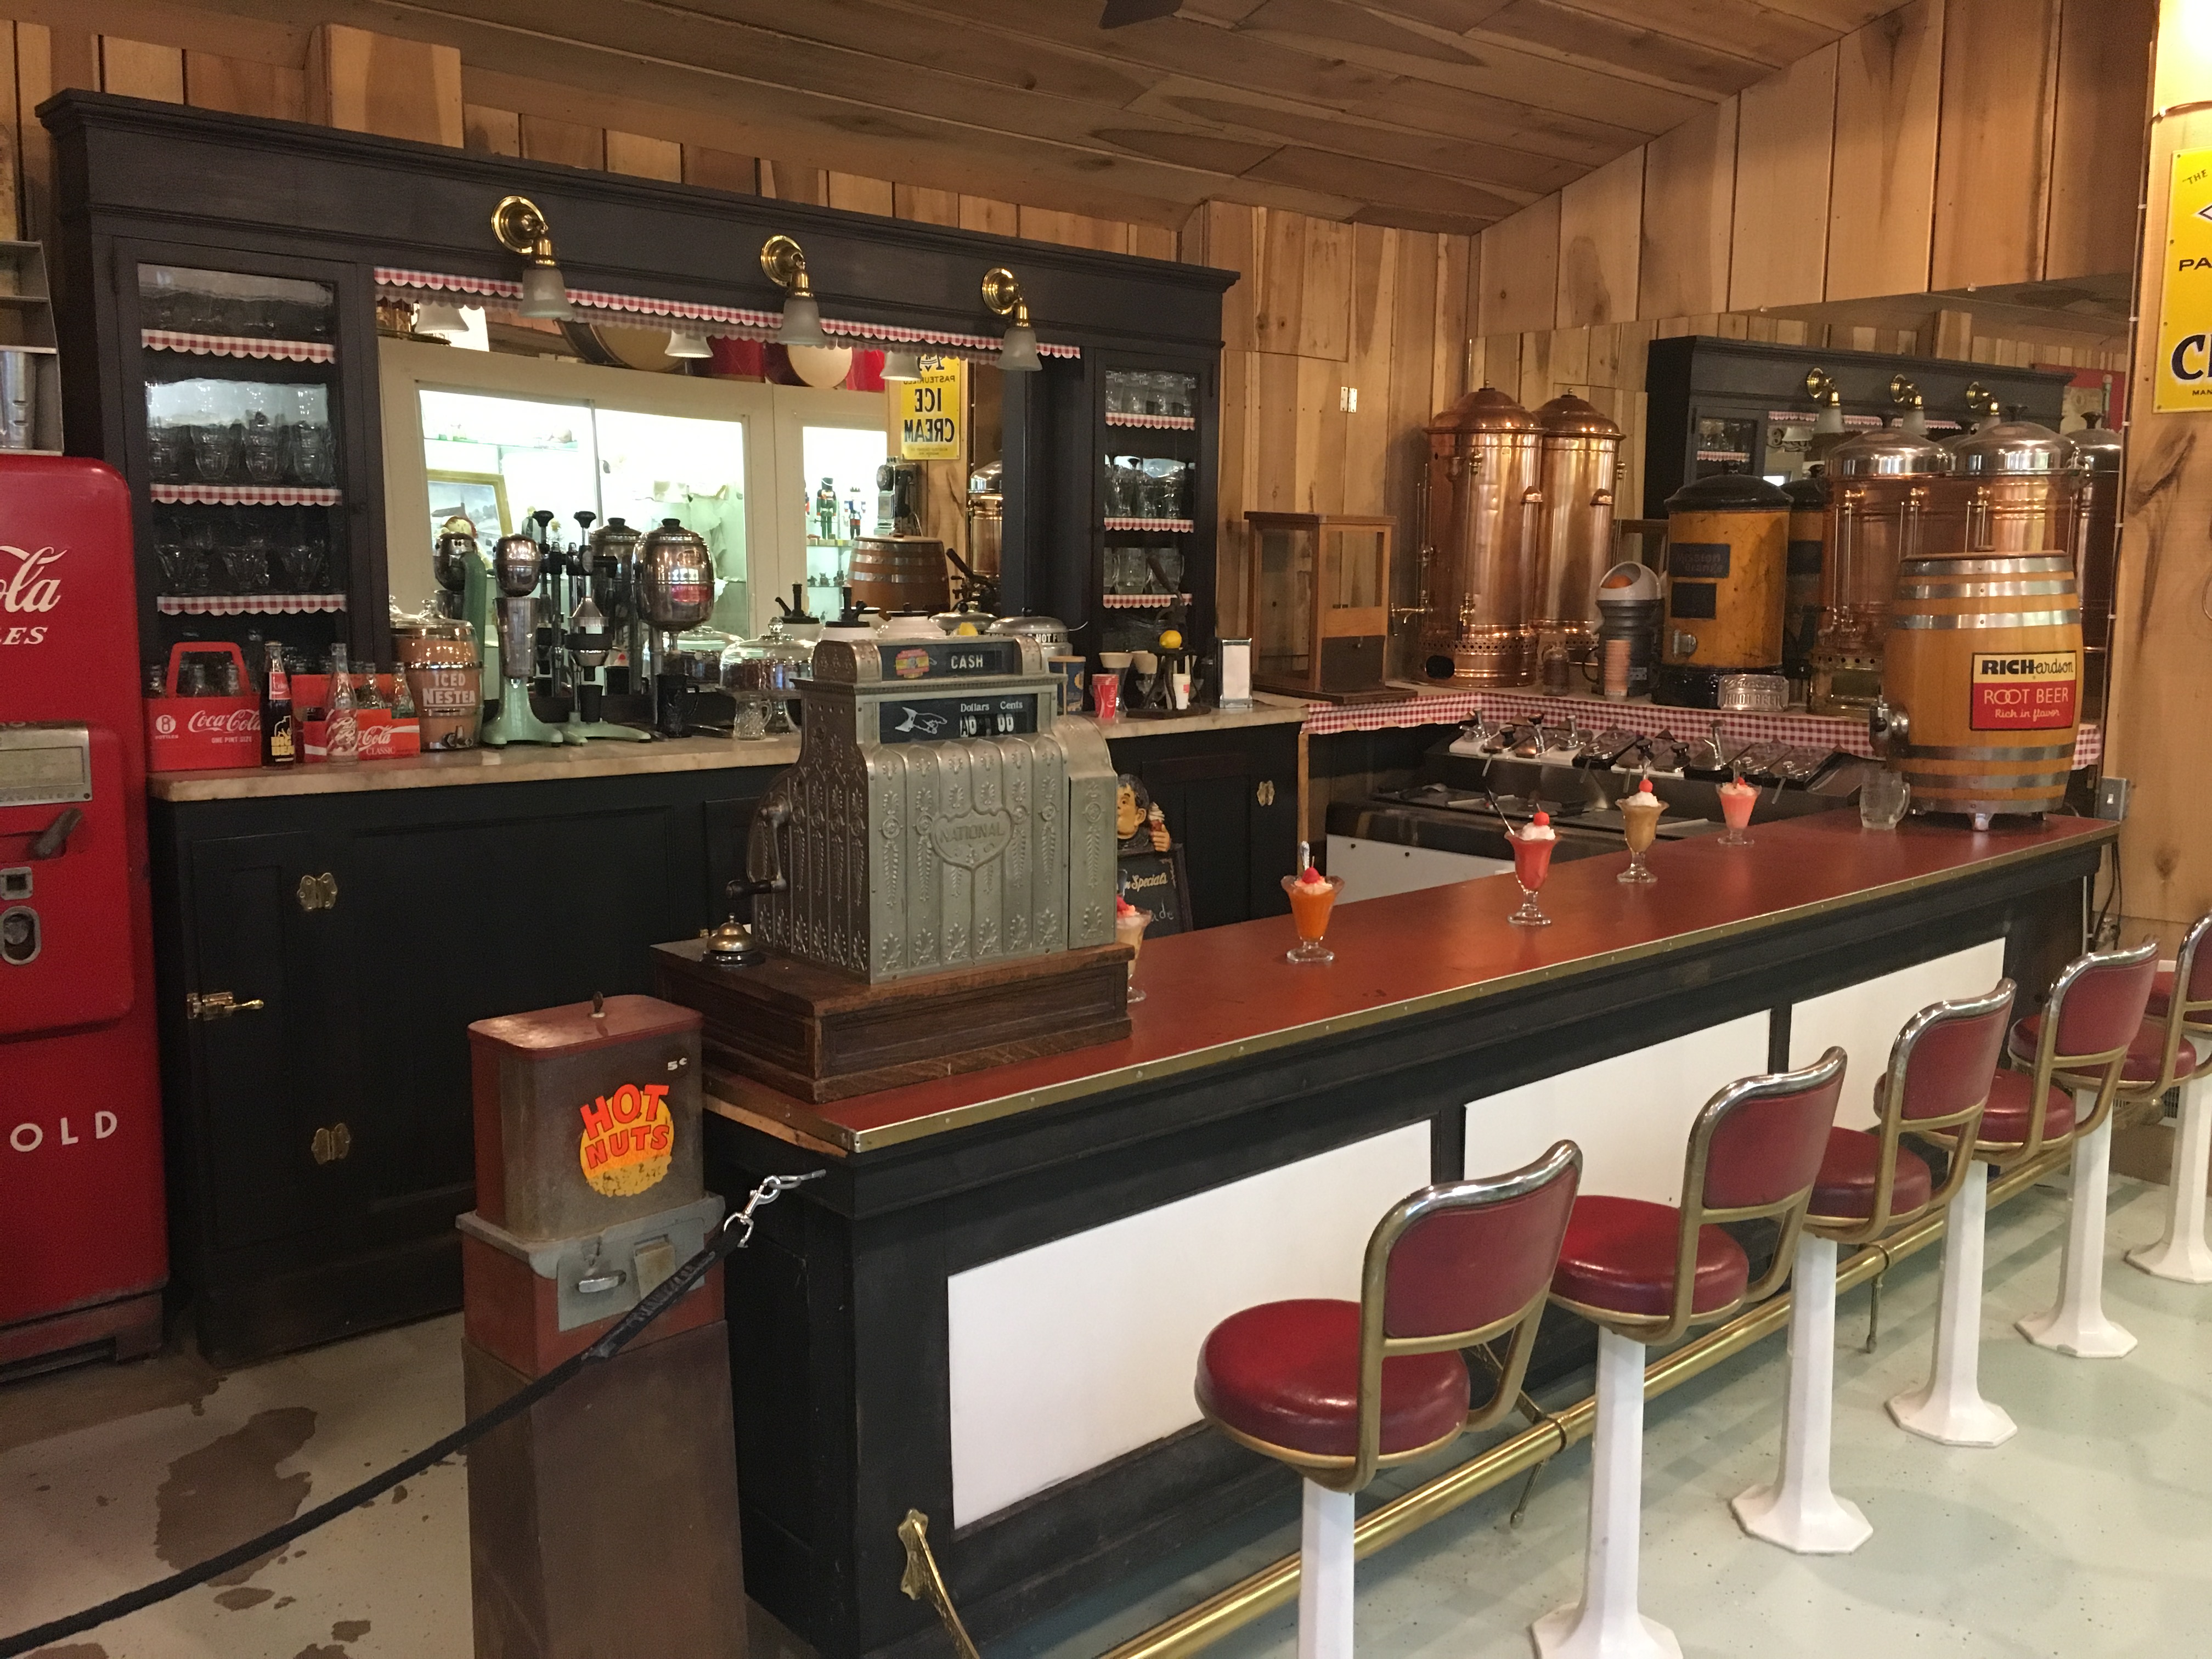 Soda fountains and ice cream parlors such as this were once a major social center in many communities from the 1920s to the 1950s.